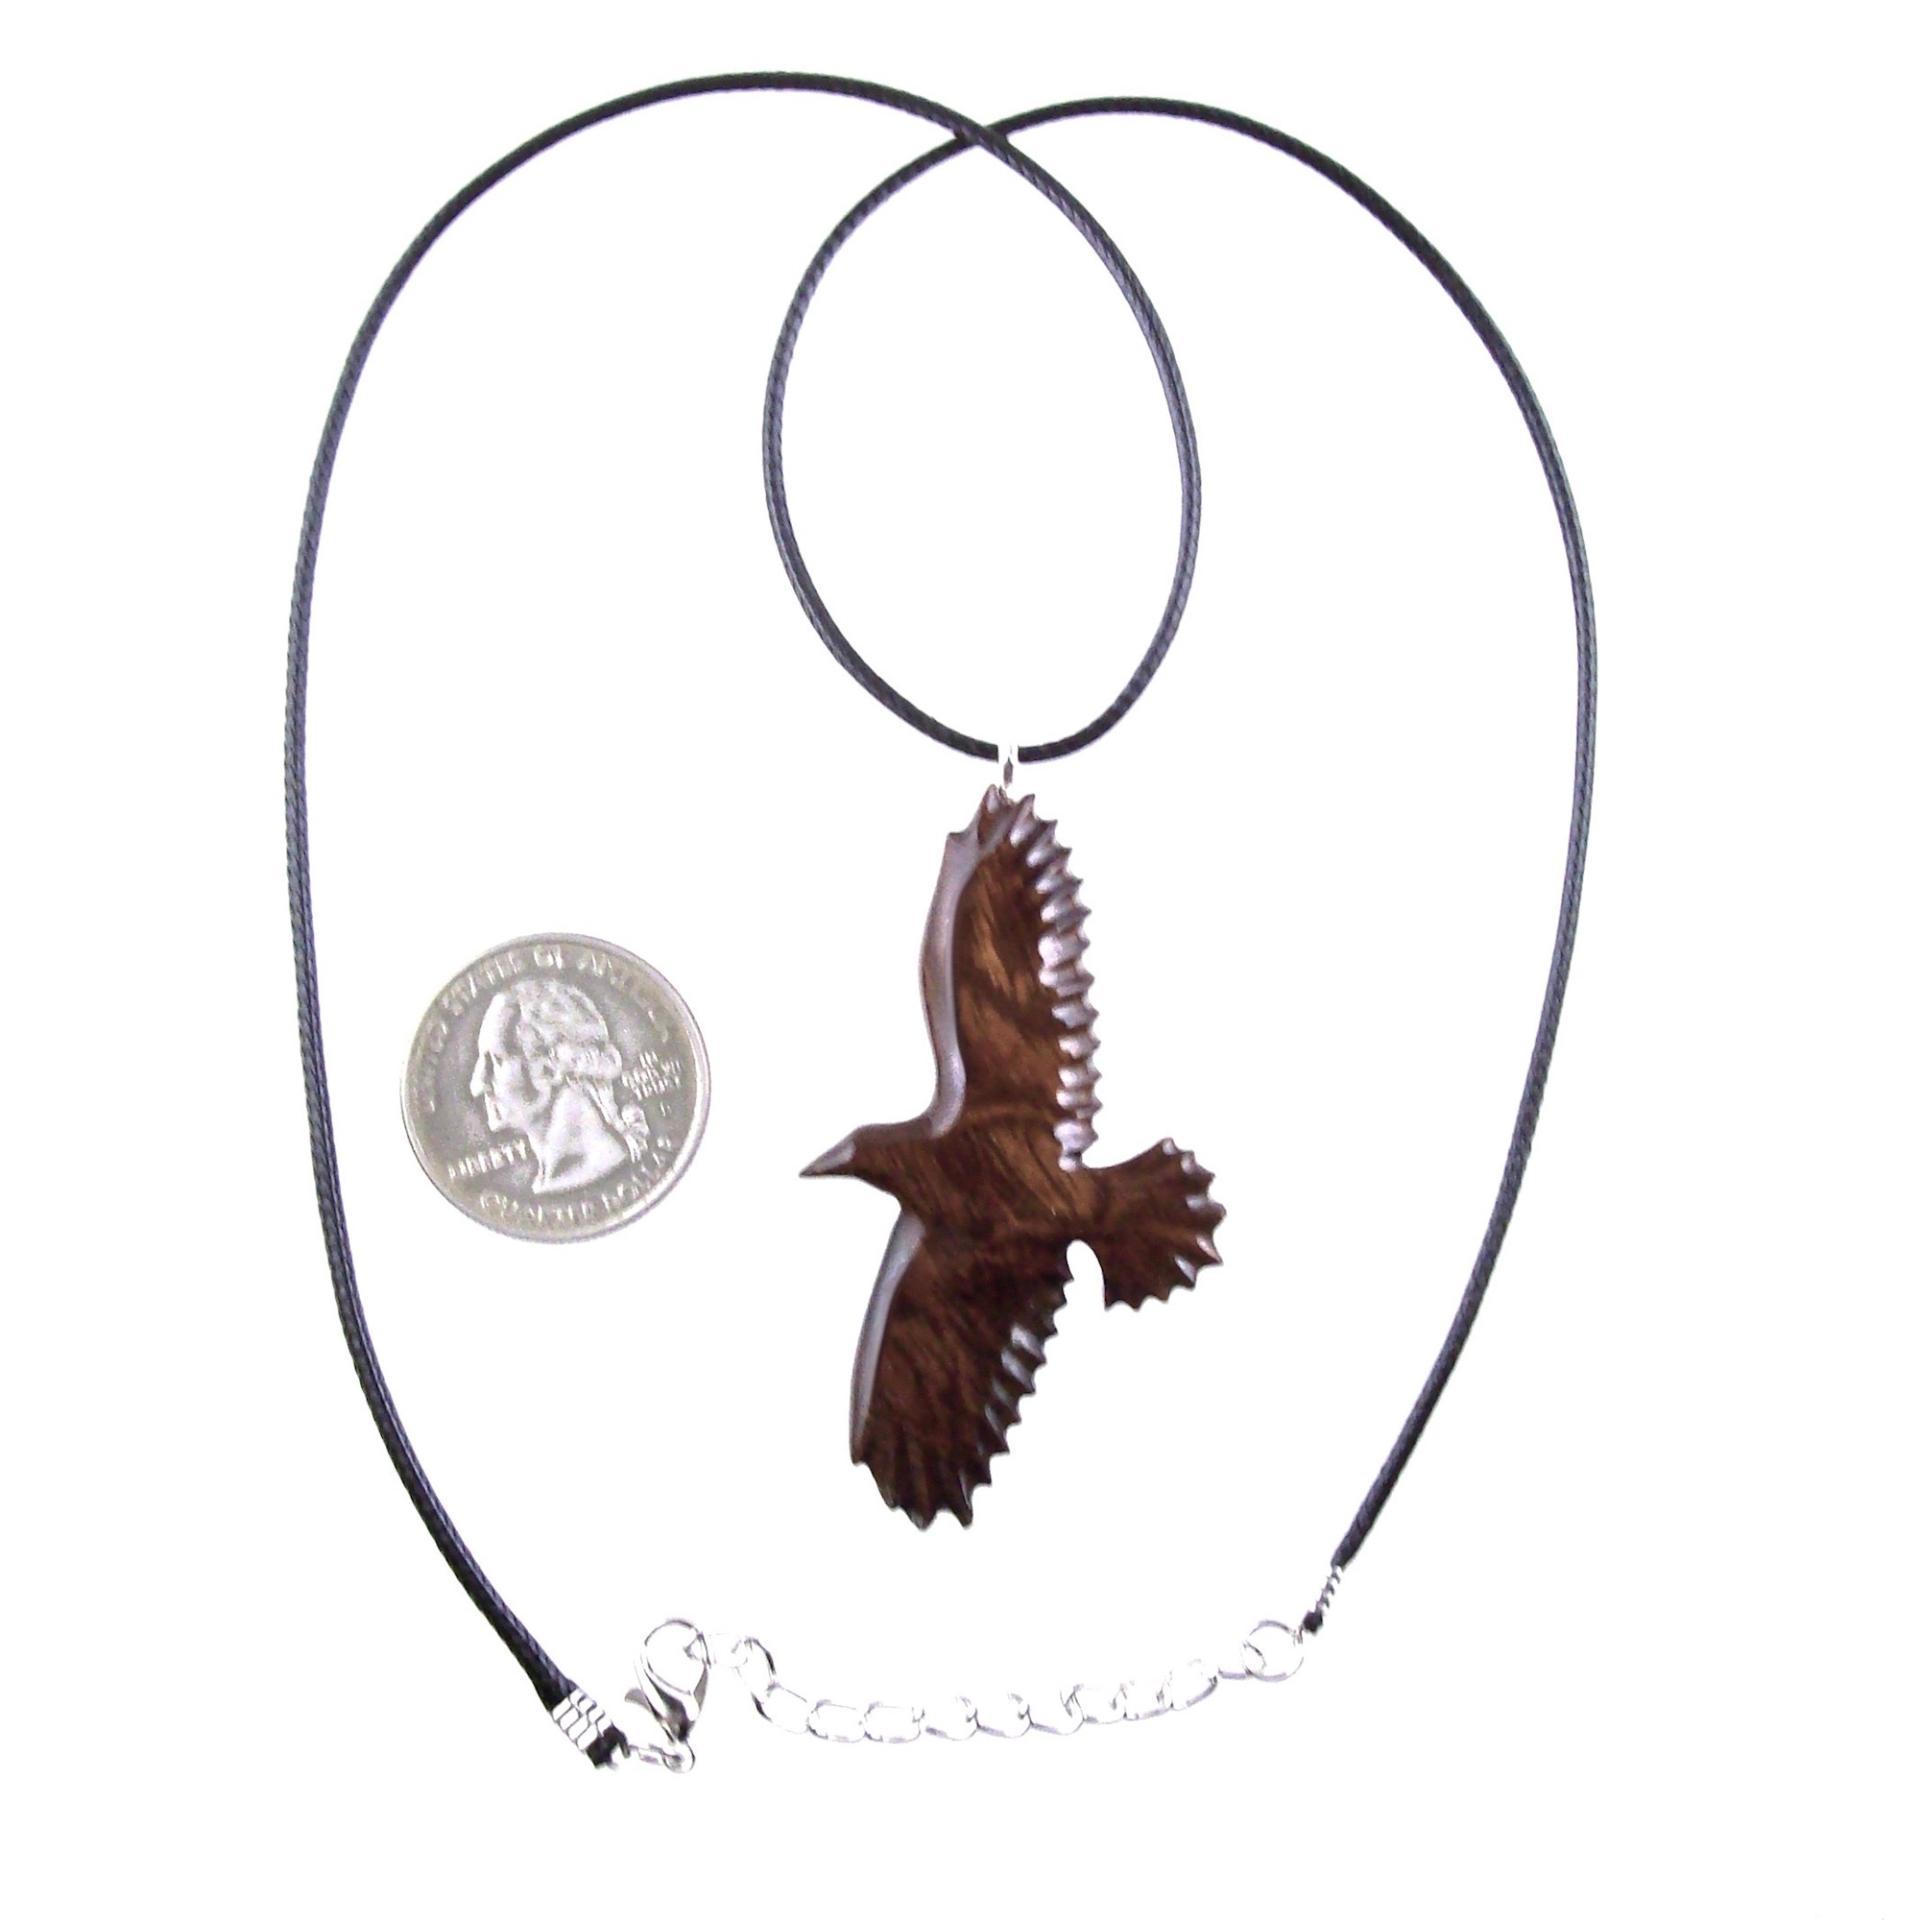 Hand Carved Raven Necklace for Men or Women, Wooden Crow Pendant, Totem Wood Bird Jewelry Gift for Her Him